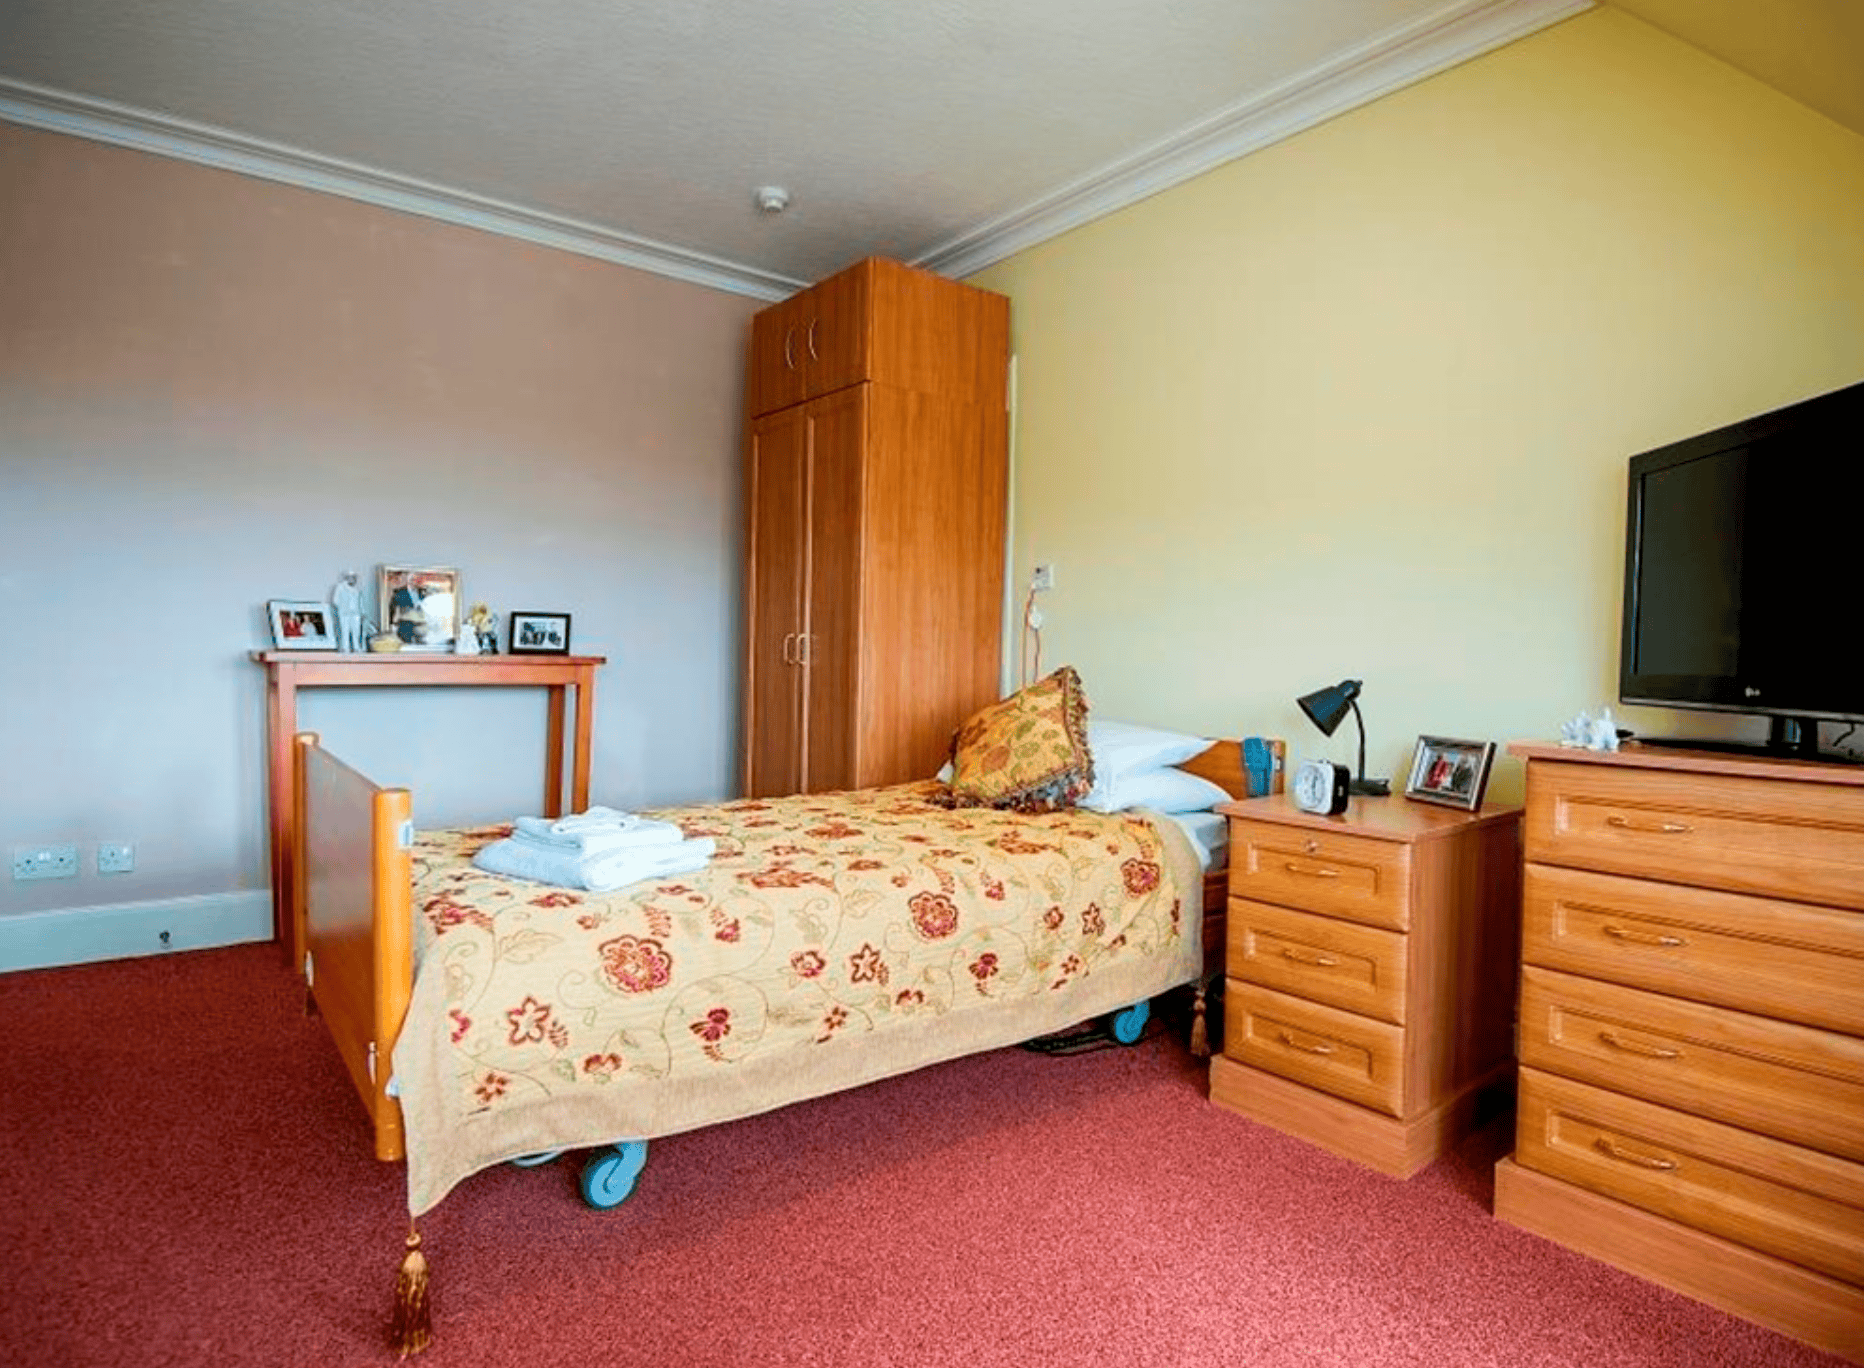 Bedroom at Bayview Care Home, Cruden Bay, Peterhead